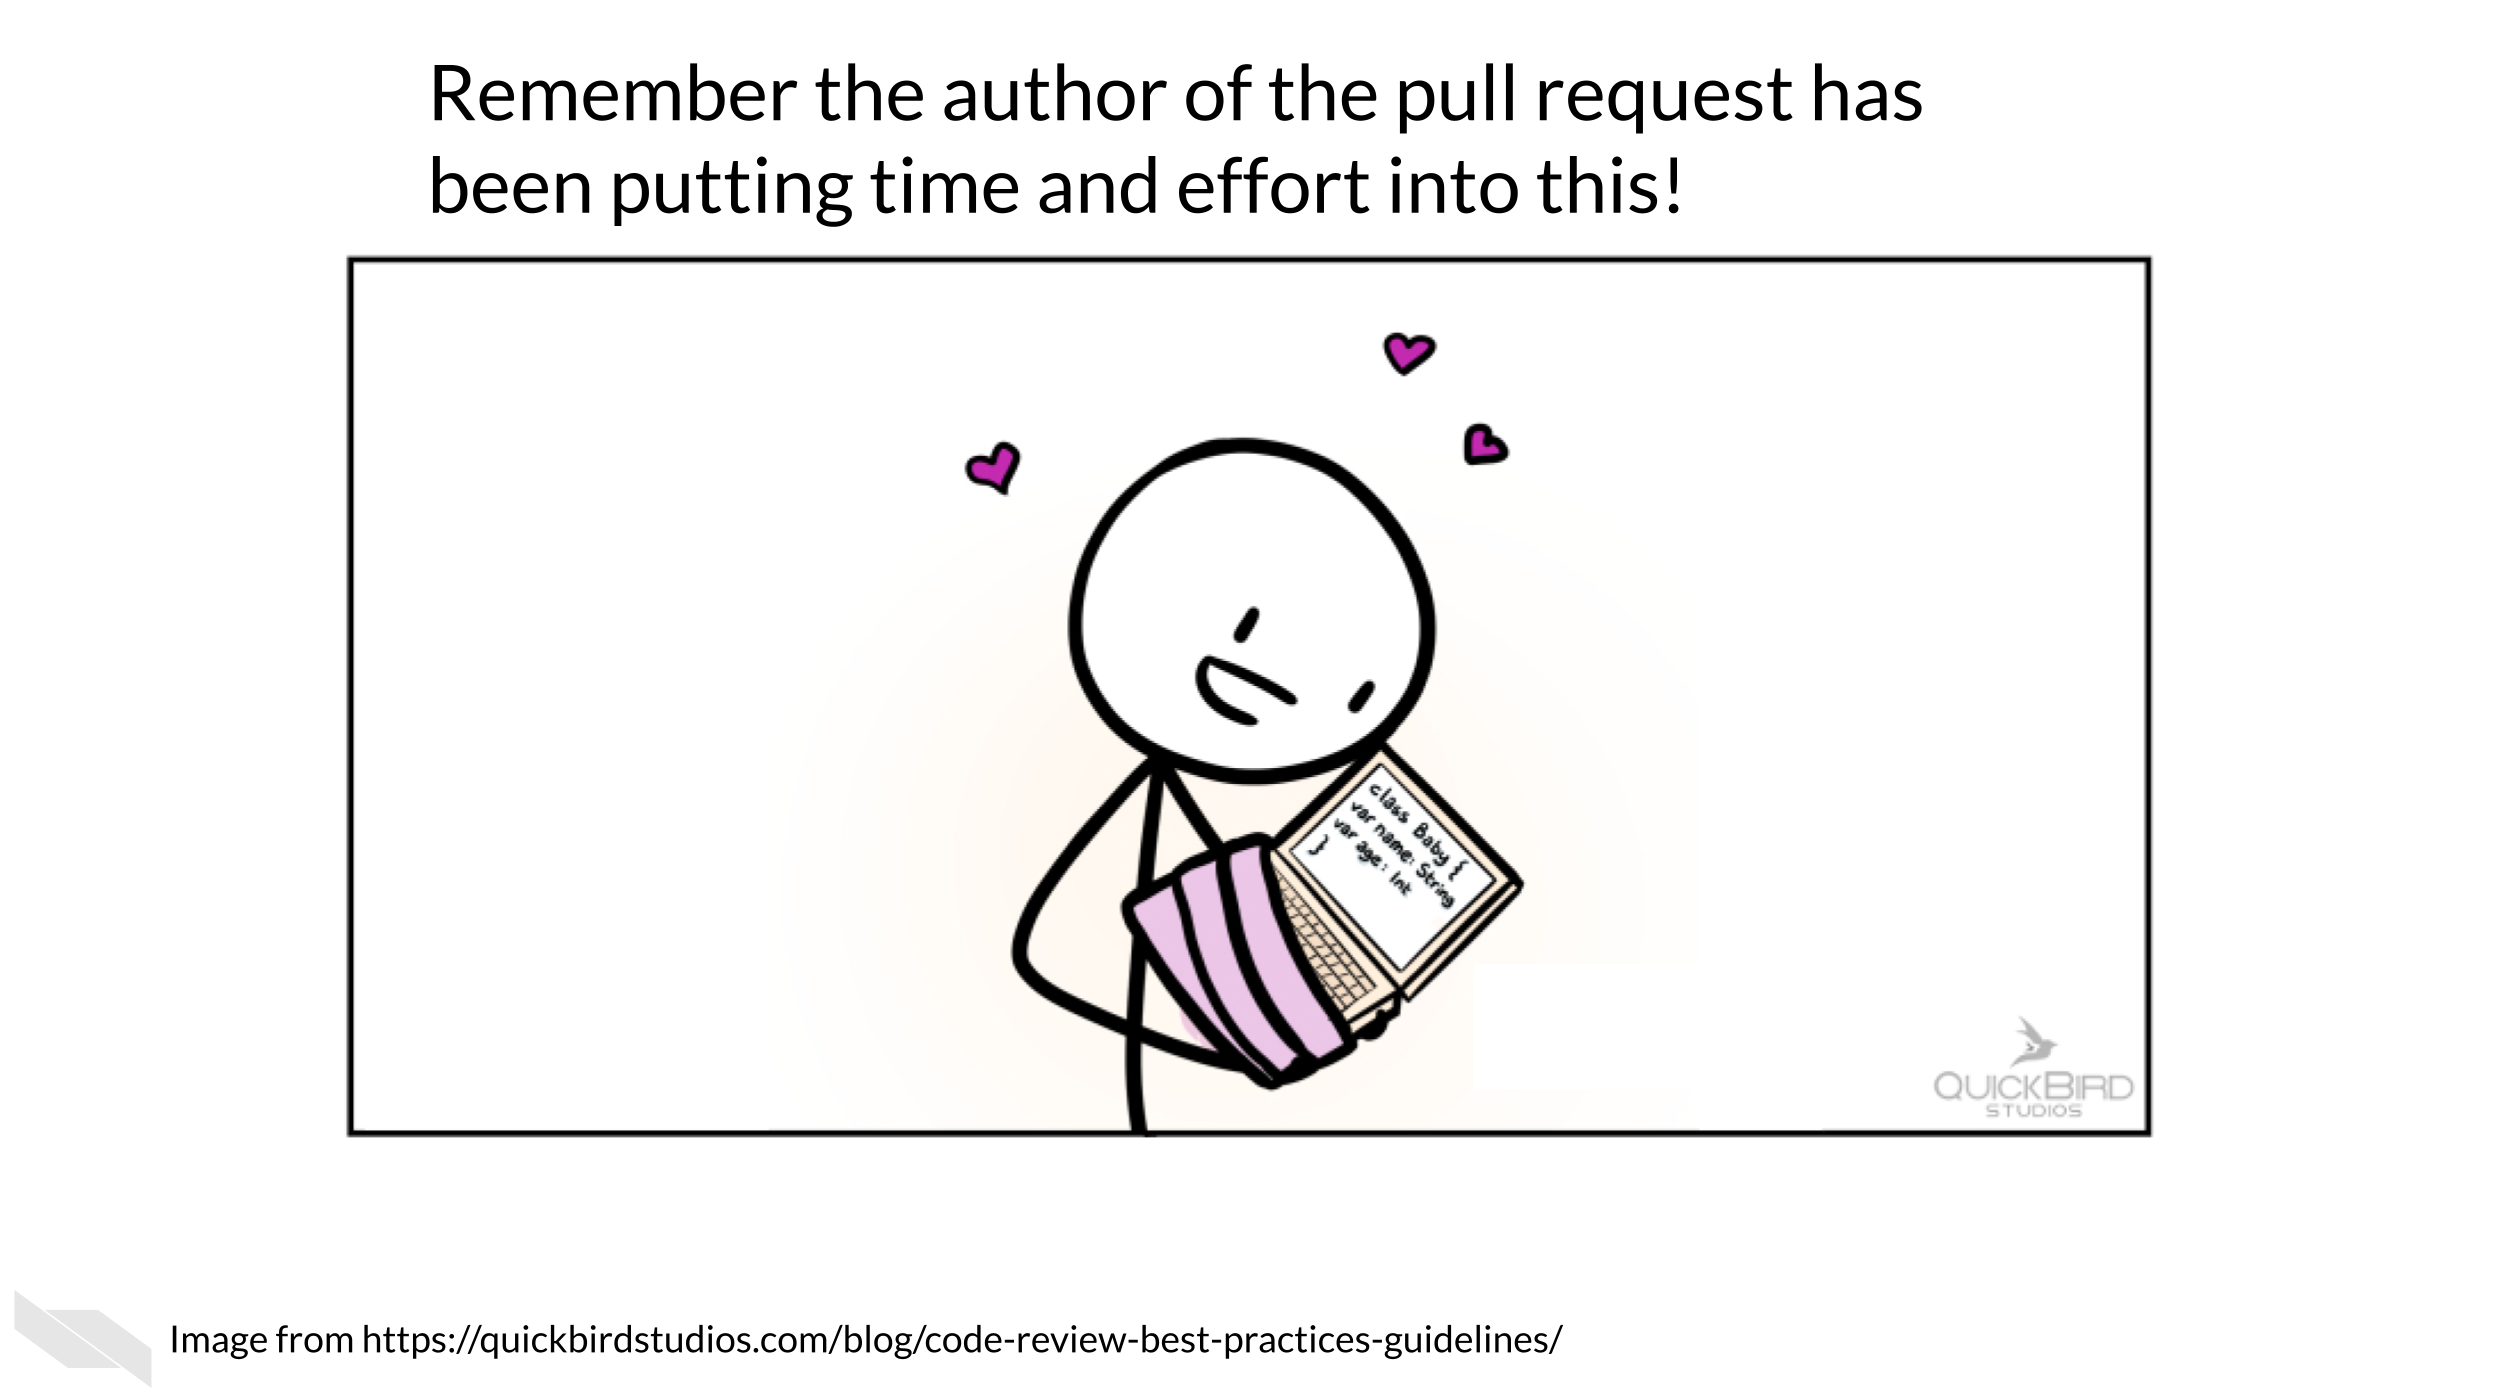 Remember the author of the pull request has been putting time and effort into this! This cartoon shows a stick person cradling a computer with code on it with lots of hearts and love swirling around. The pull request may be the author’s precious bundle. Try to be empathetic to the learning process!